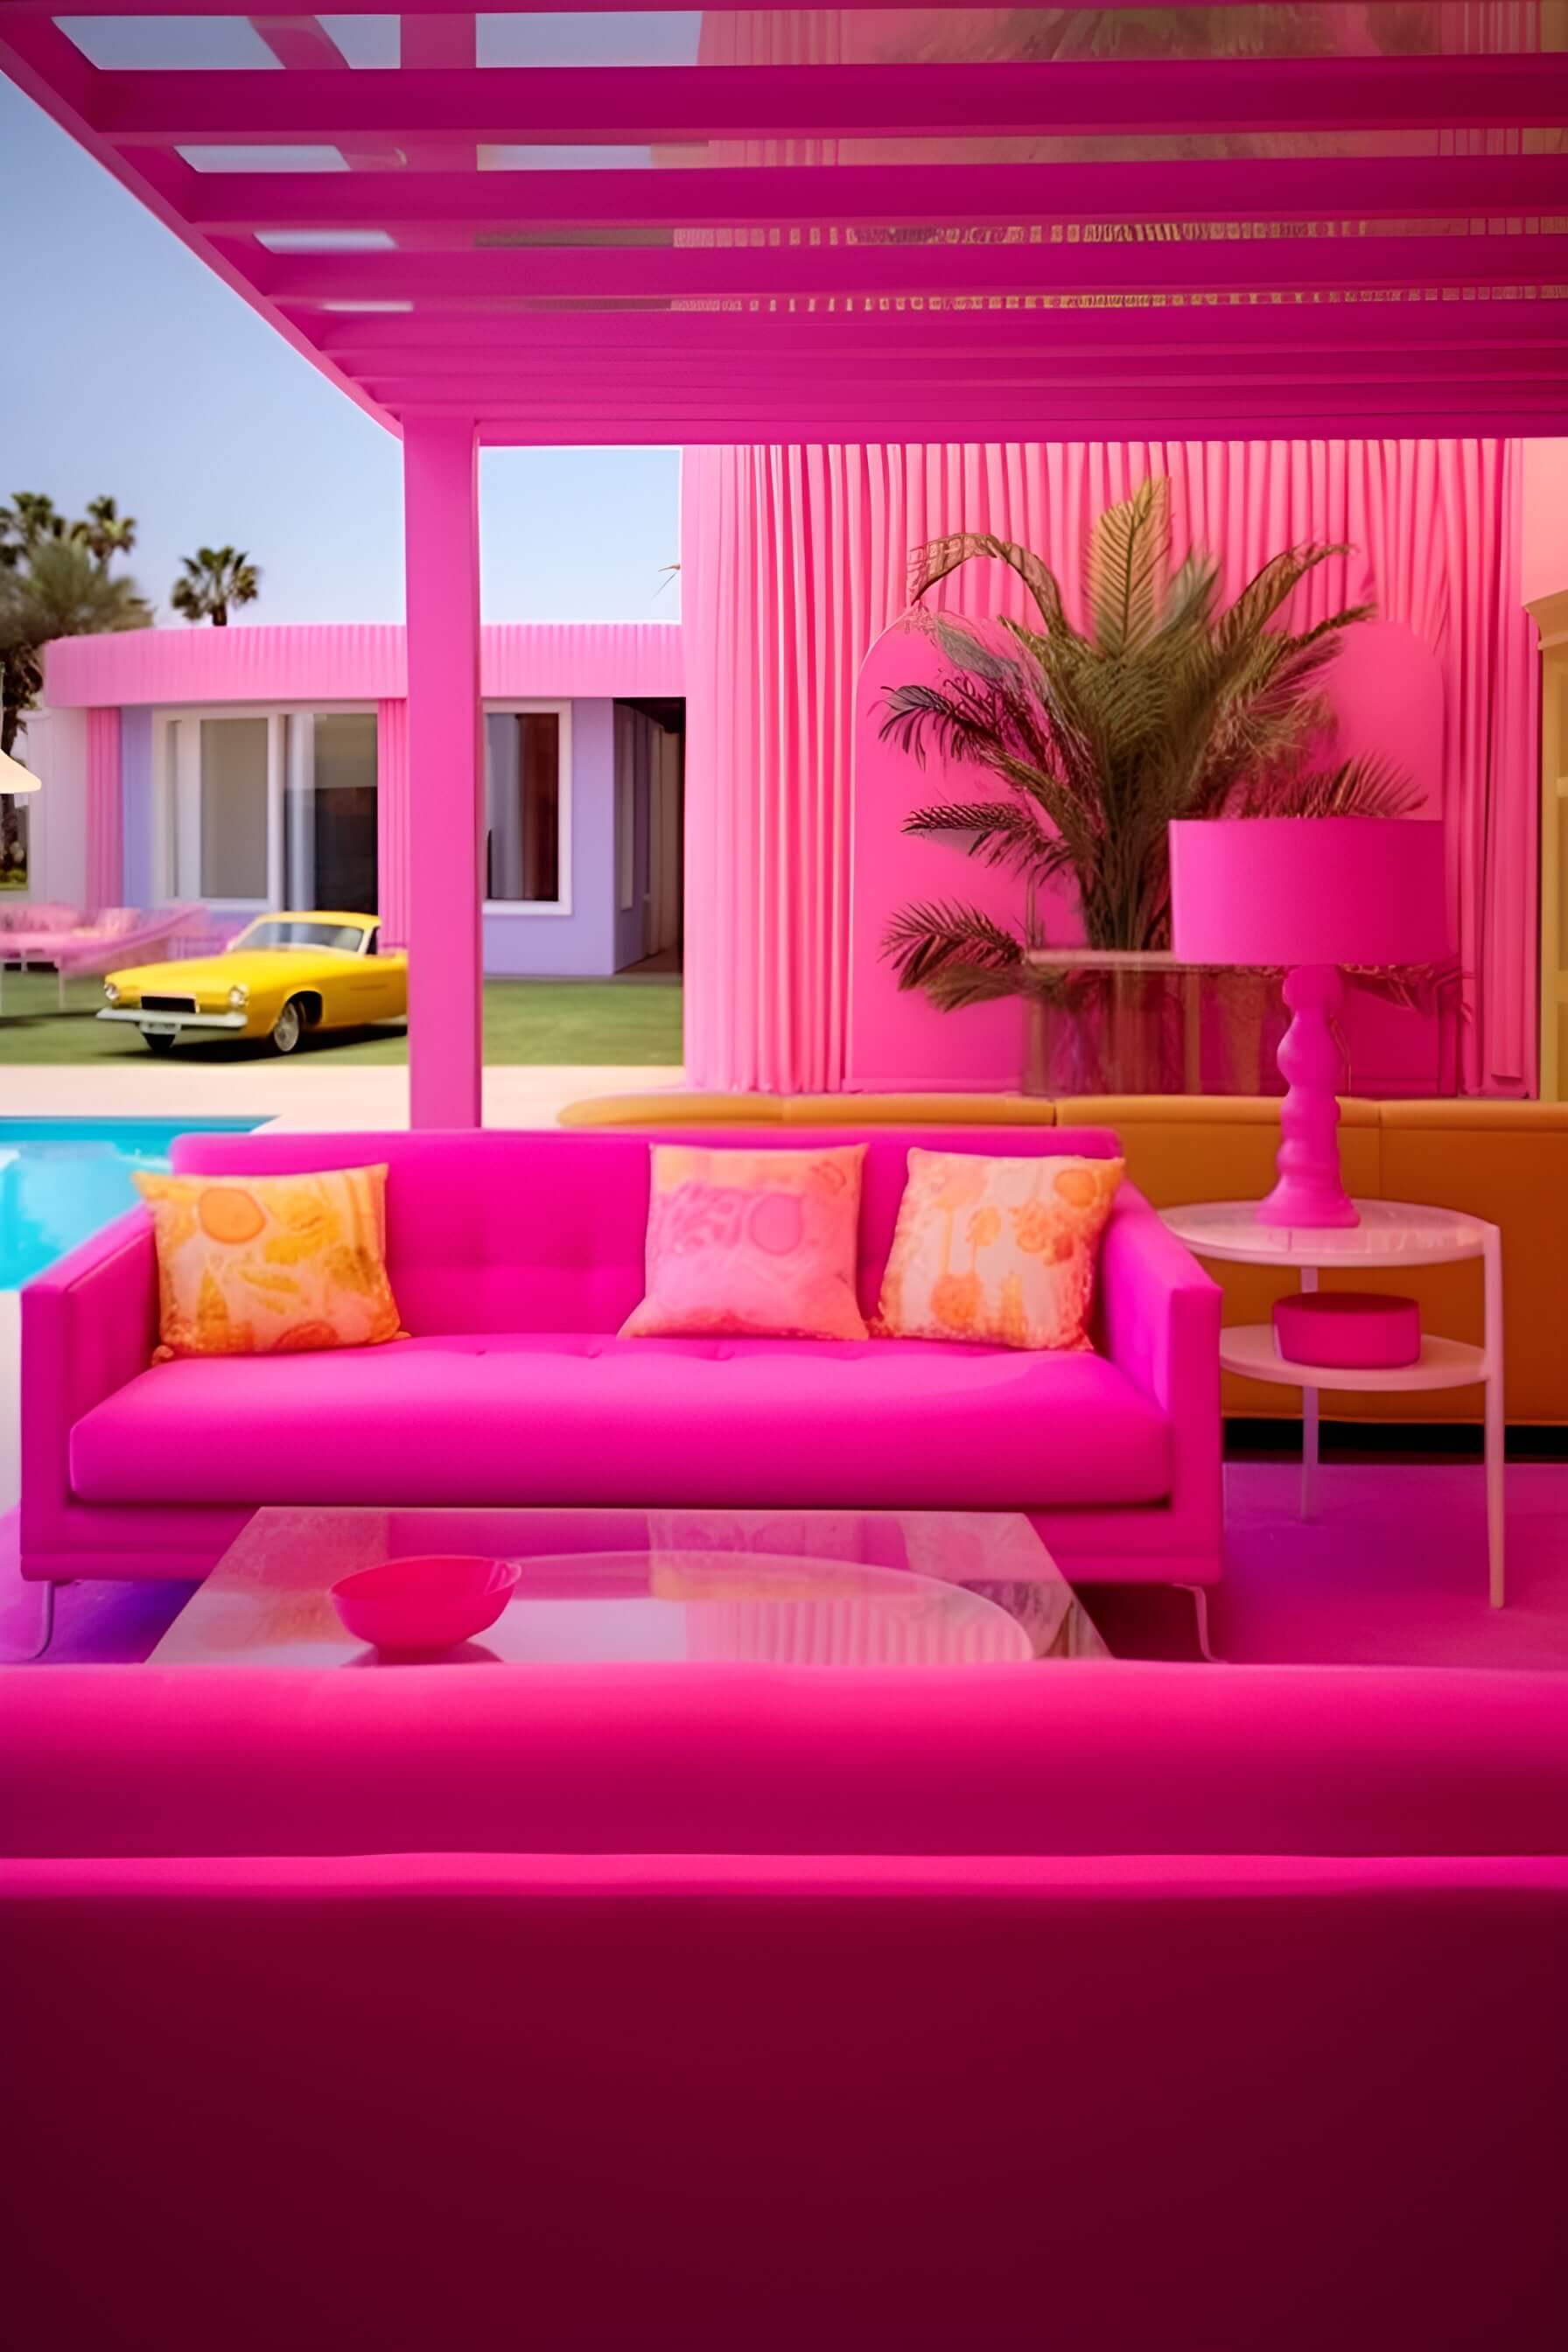 a hot pink living space with hot pink couches, hot pink lampshade, hot pink walls and ceiling, with a pool and retro yellow car in the background